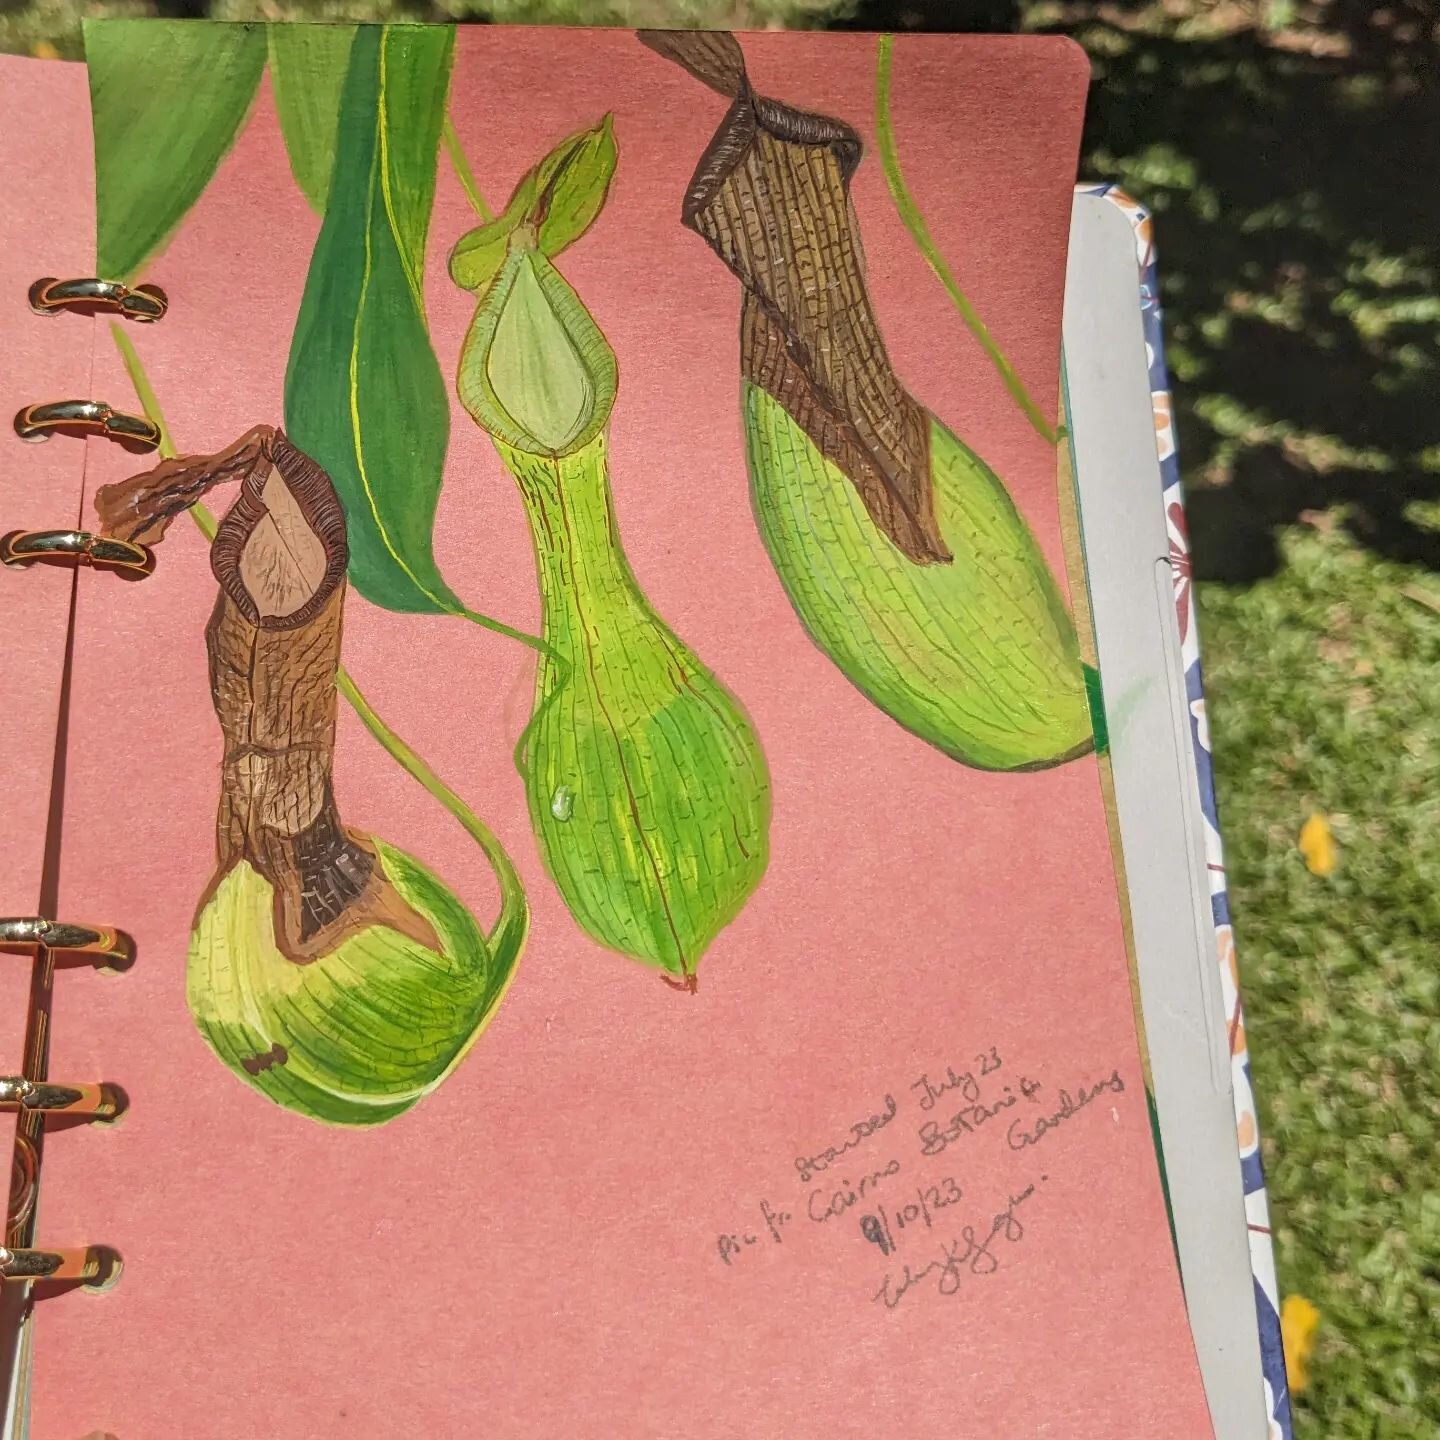 Pitcher Plants seen at the Cairns Botanical Gardens a few months ago.

It's always fun when pieces go from &quot;work in progress&quot; to complete. It was hard to know when this page was done but after working on it a few days ago I decided to leave